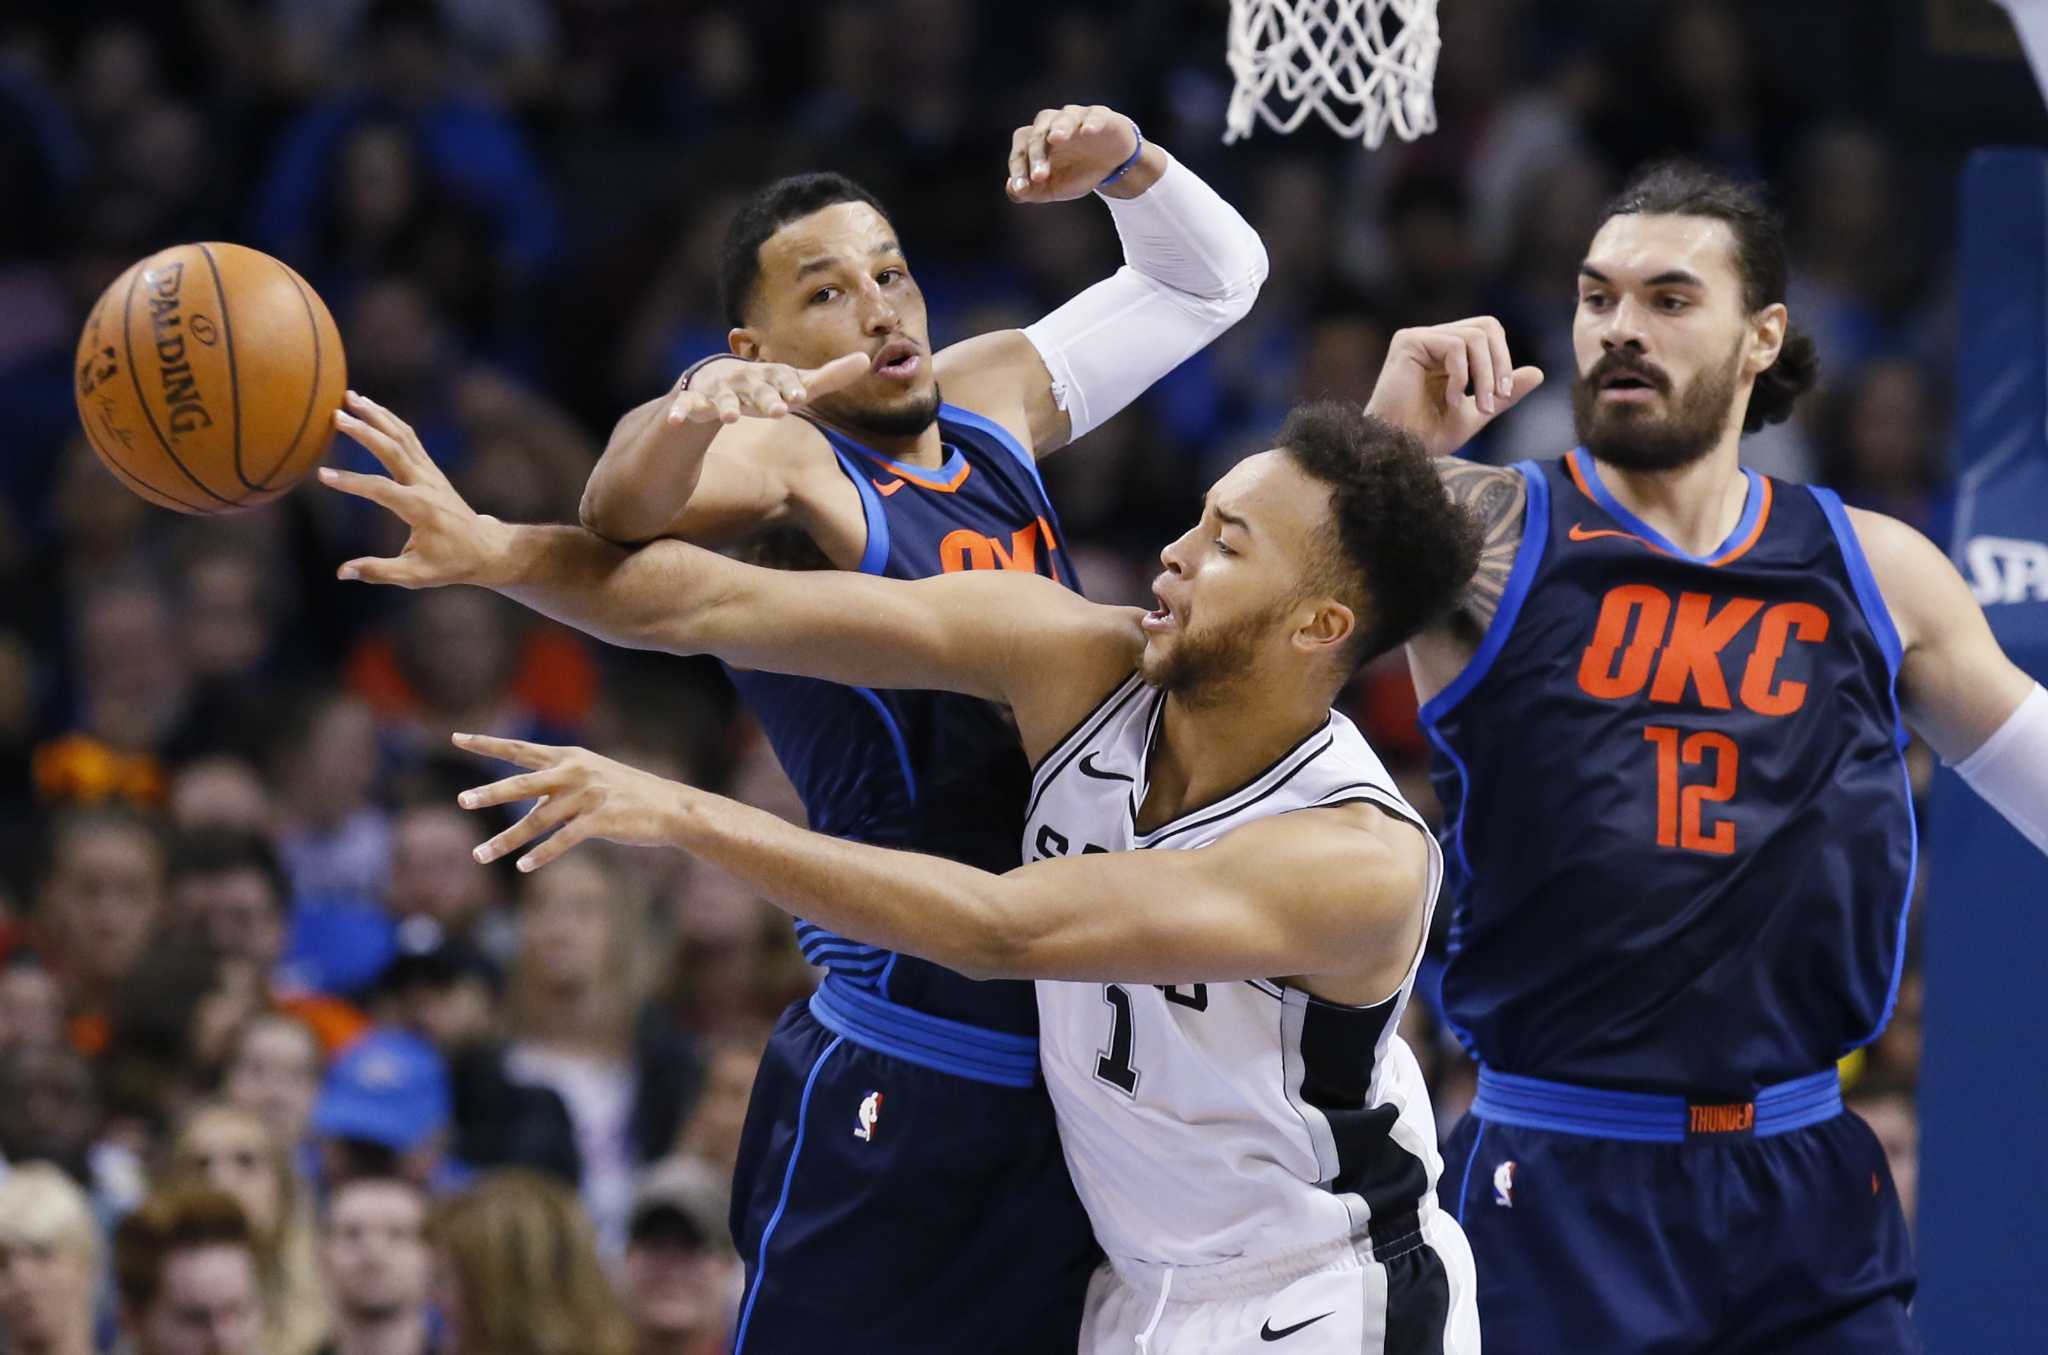 Kyle Anderson helped off court after injury during OKC game